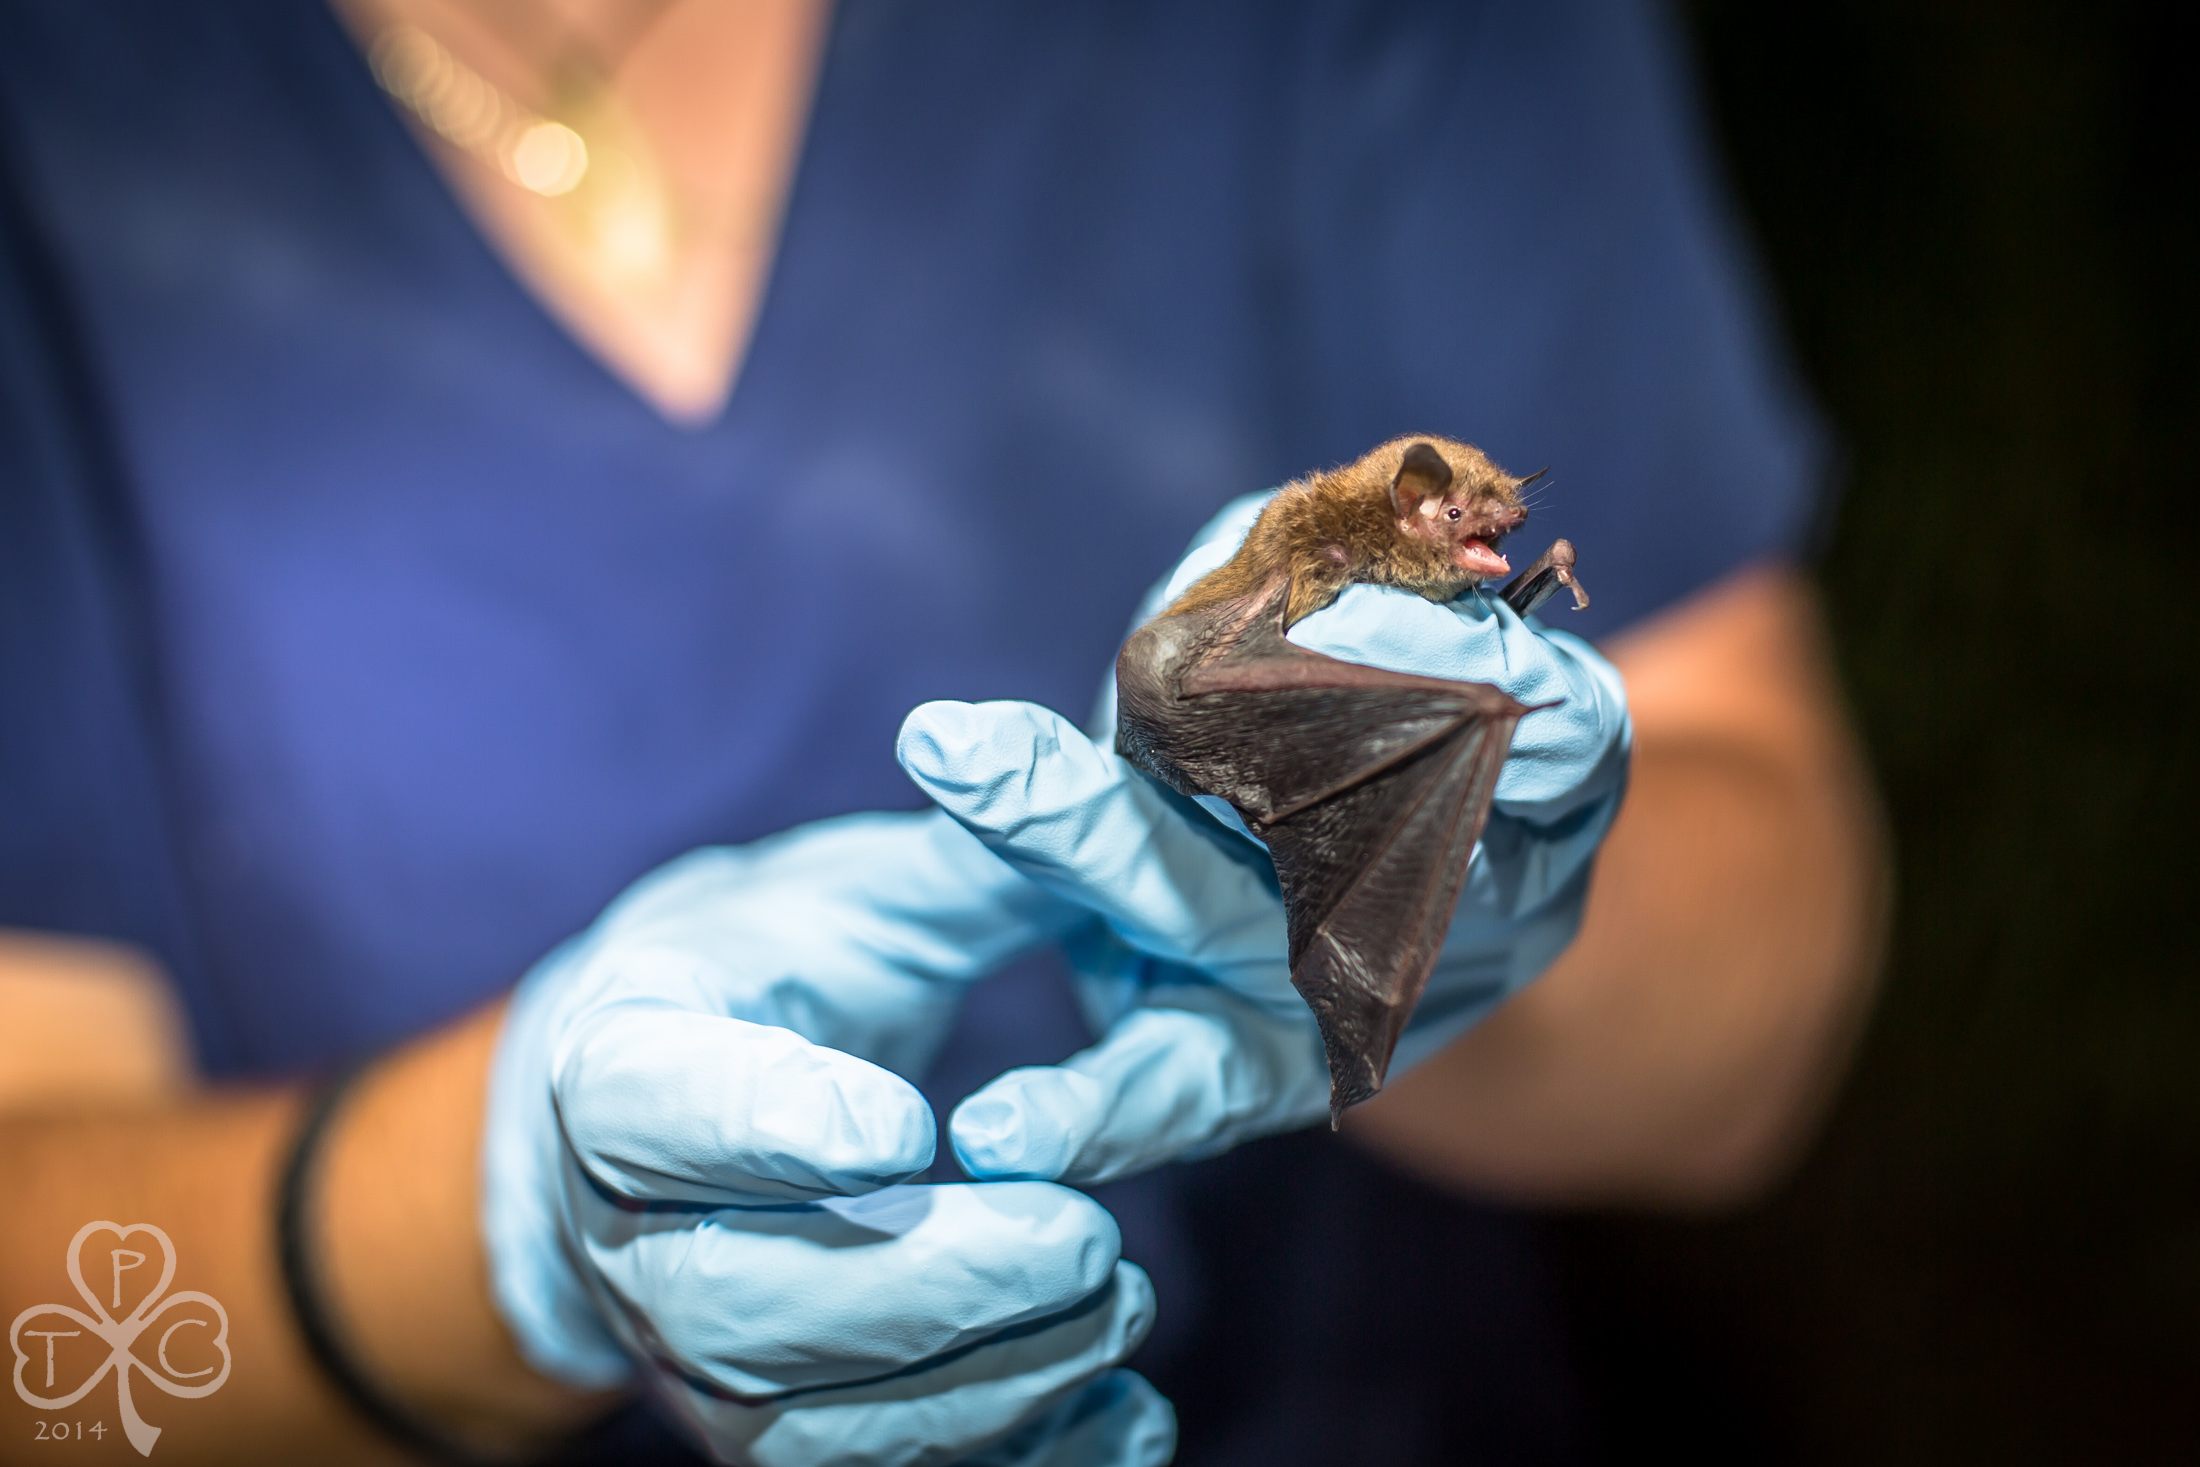 How An Endangered Bat Species Can Affect Your Project